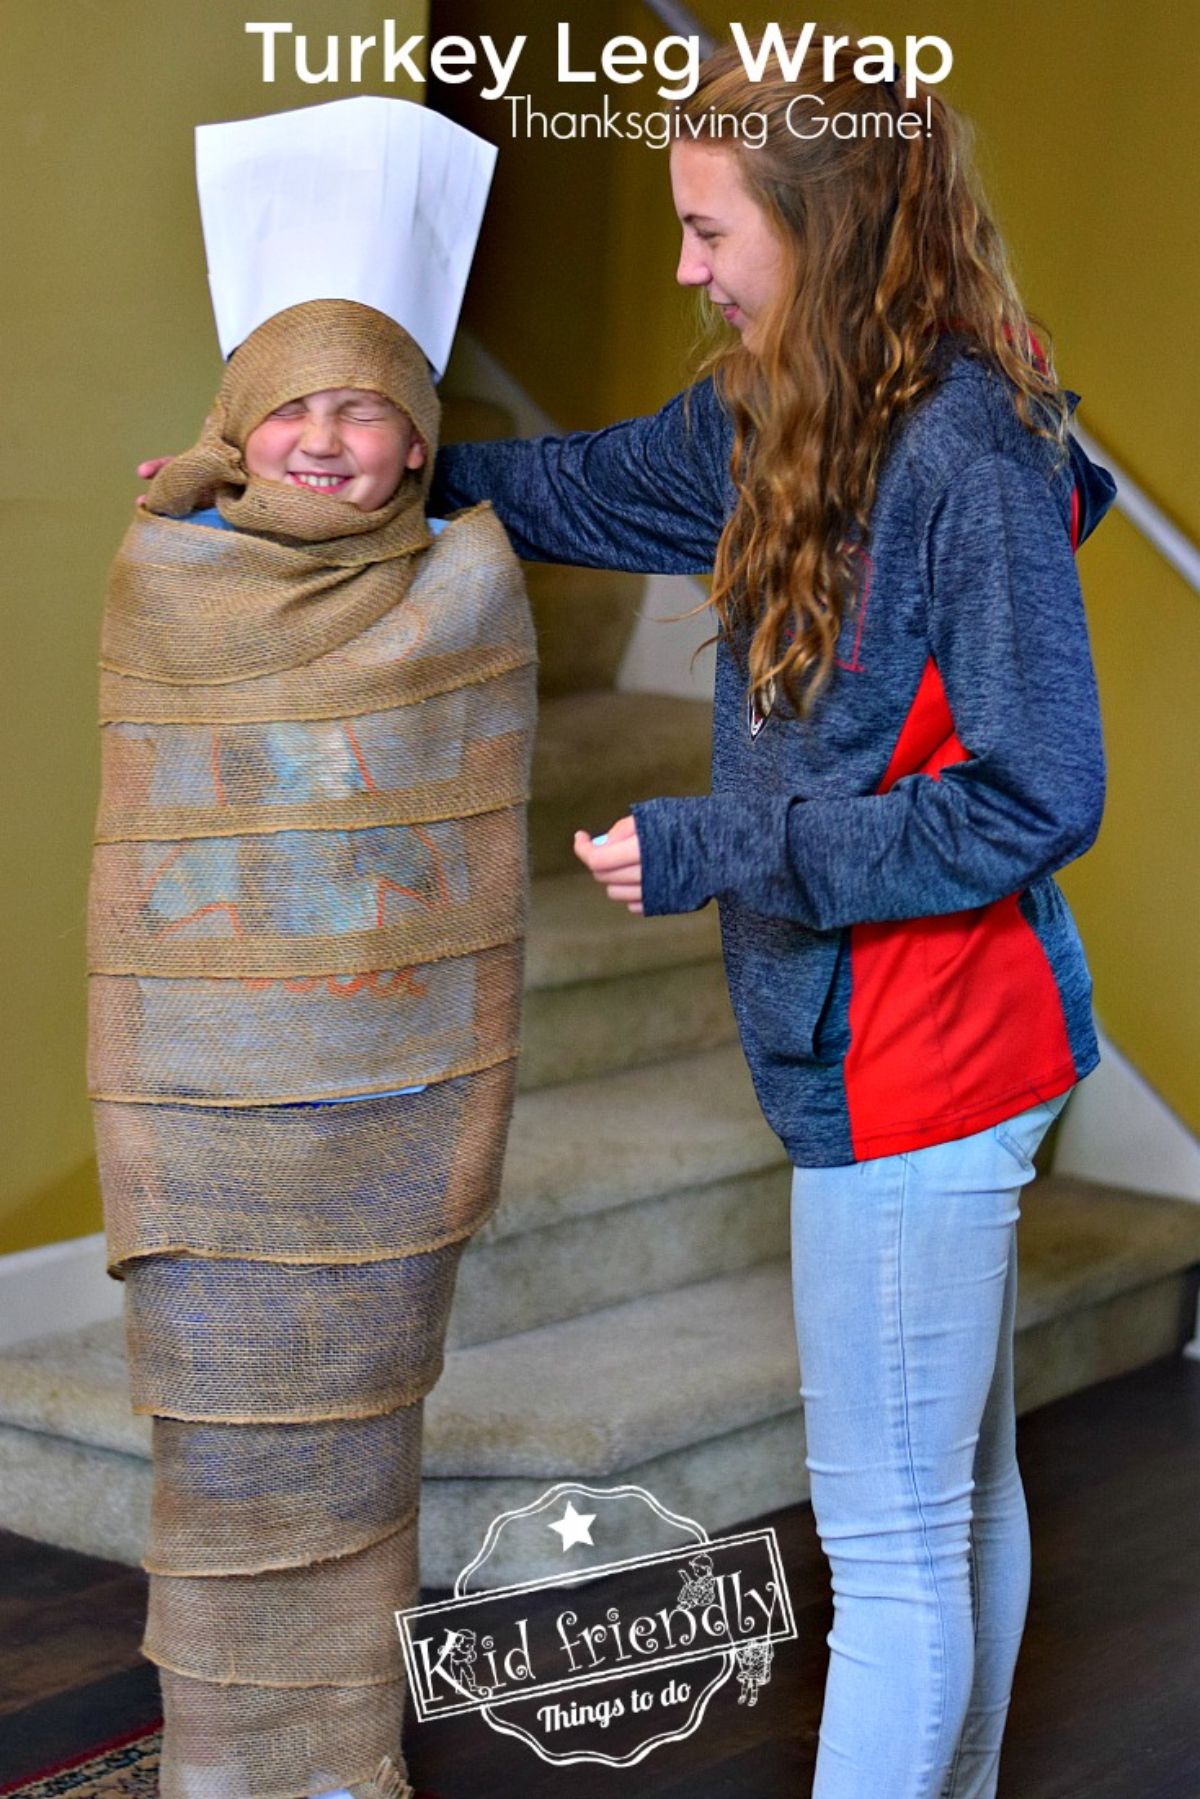 the text reads "turkey leg wrap thanksgiving game". The image is of two children, one wrapped in burlap with a chef hat on their head. The other is a girl with long hair tucking the burlap into his neck.